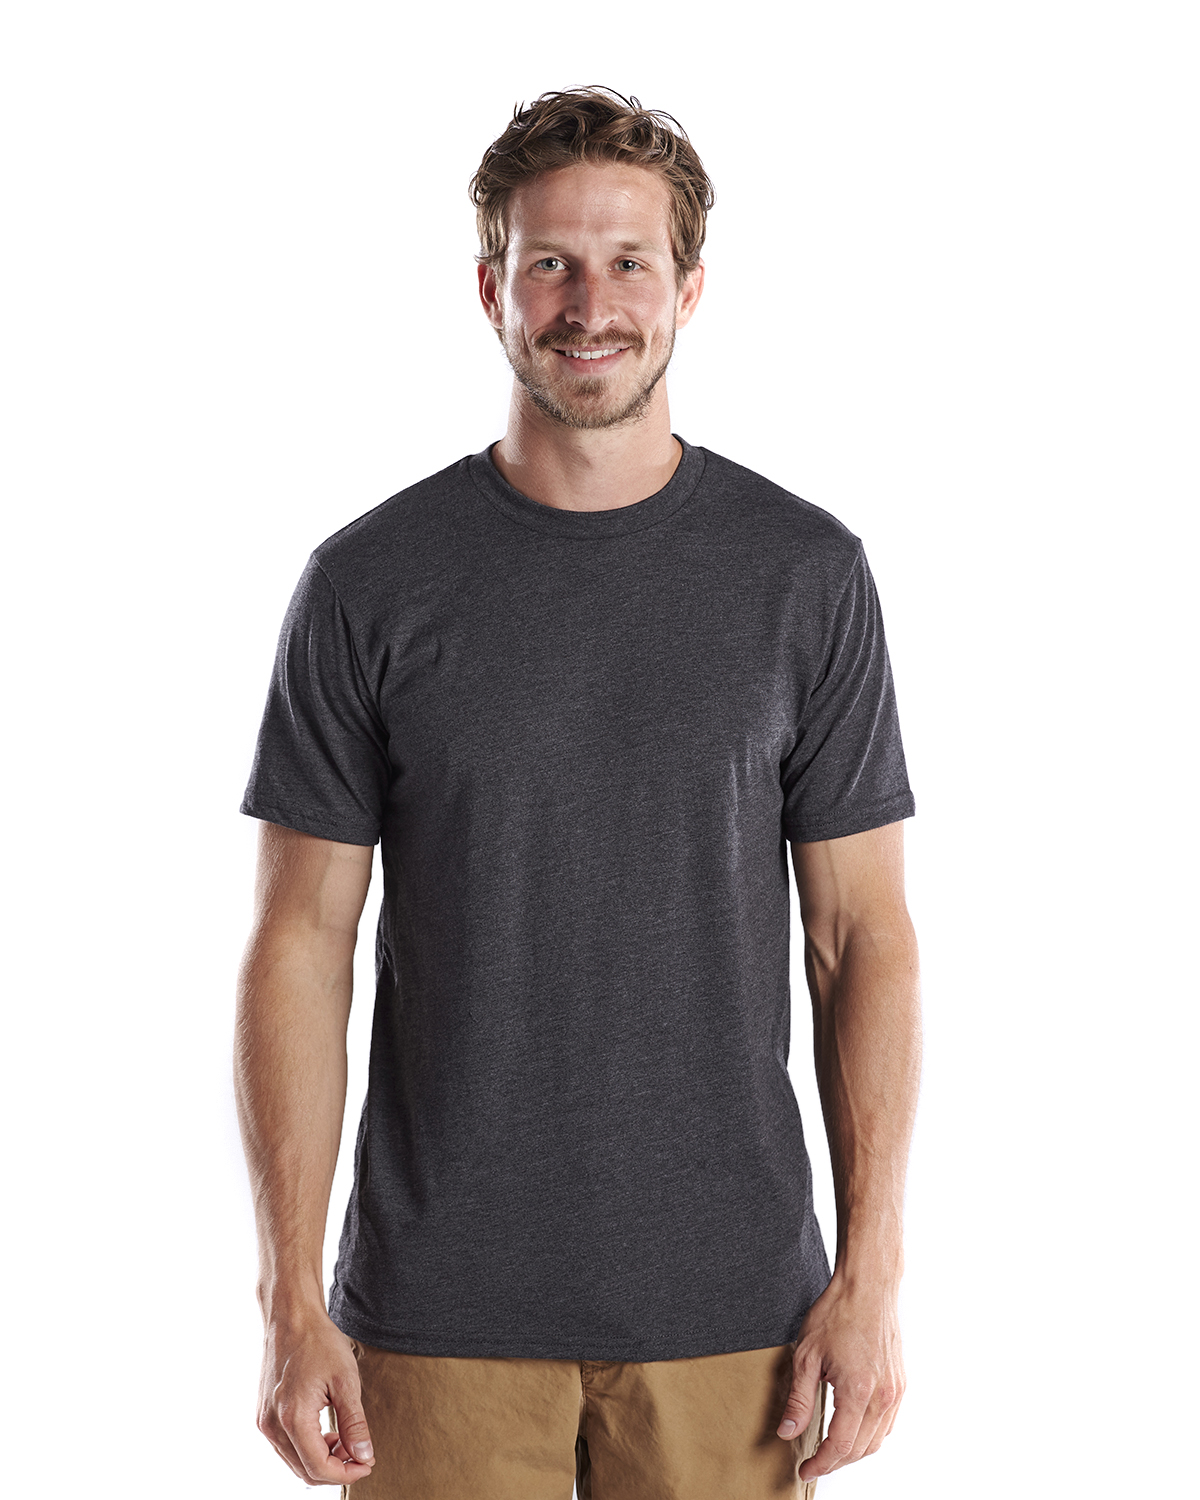 US Blanks US2000R - Men's Short-Sleeve Recycled Crew Neck T-Shirt